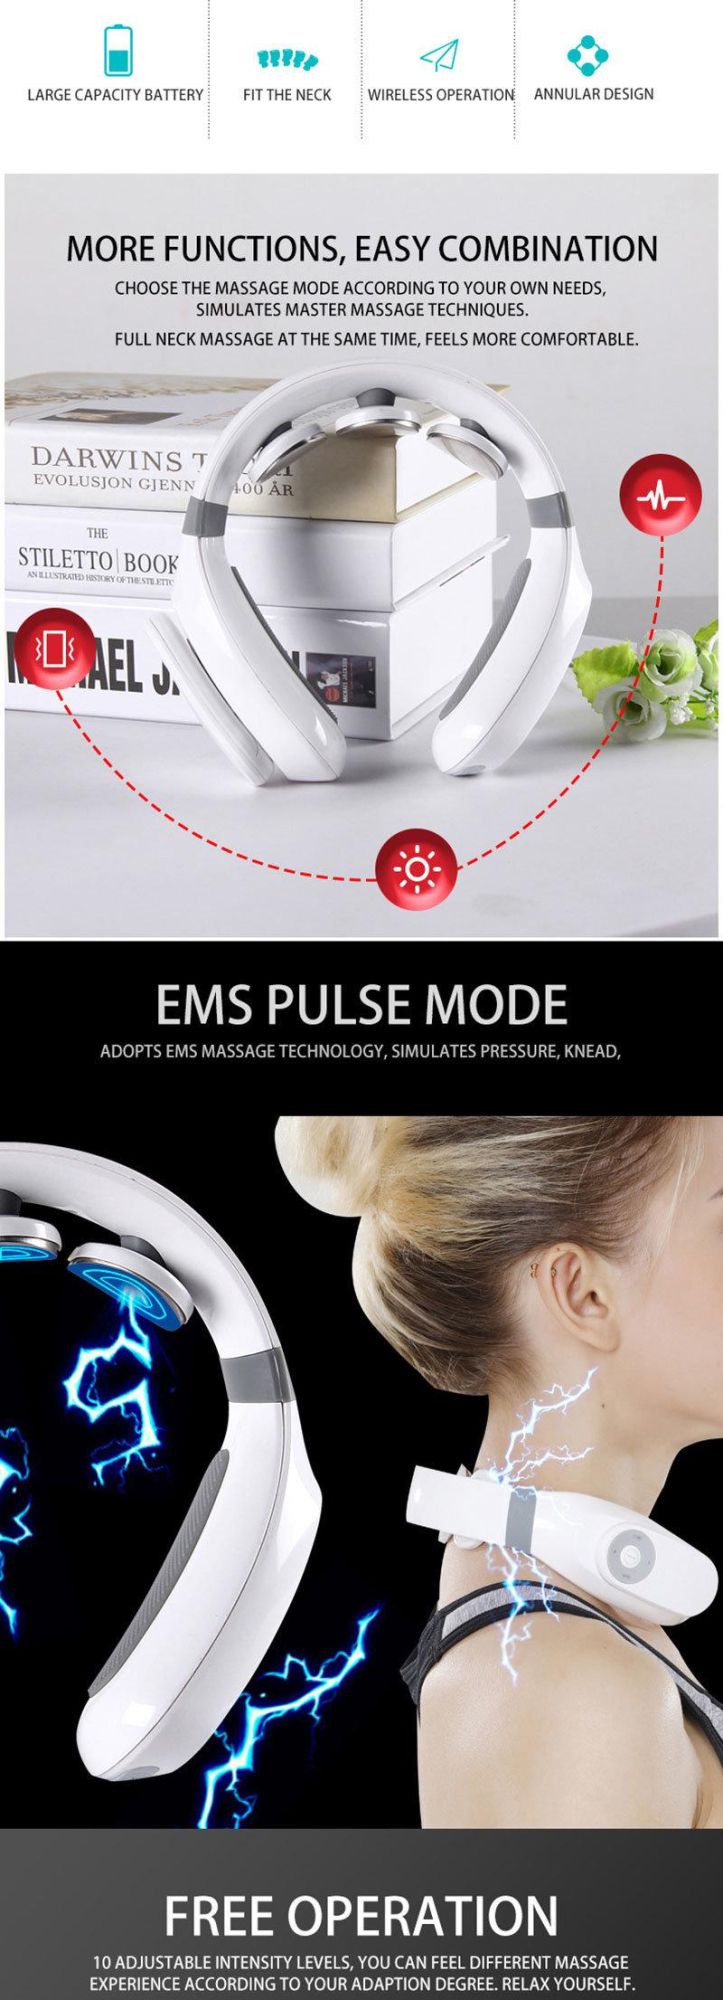 2020 Electronic Pulse Neck Massage Machines Digital Therapy Percussion Massager